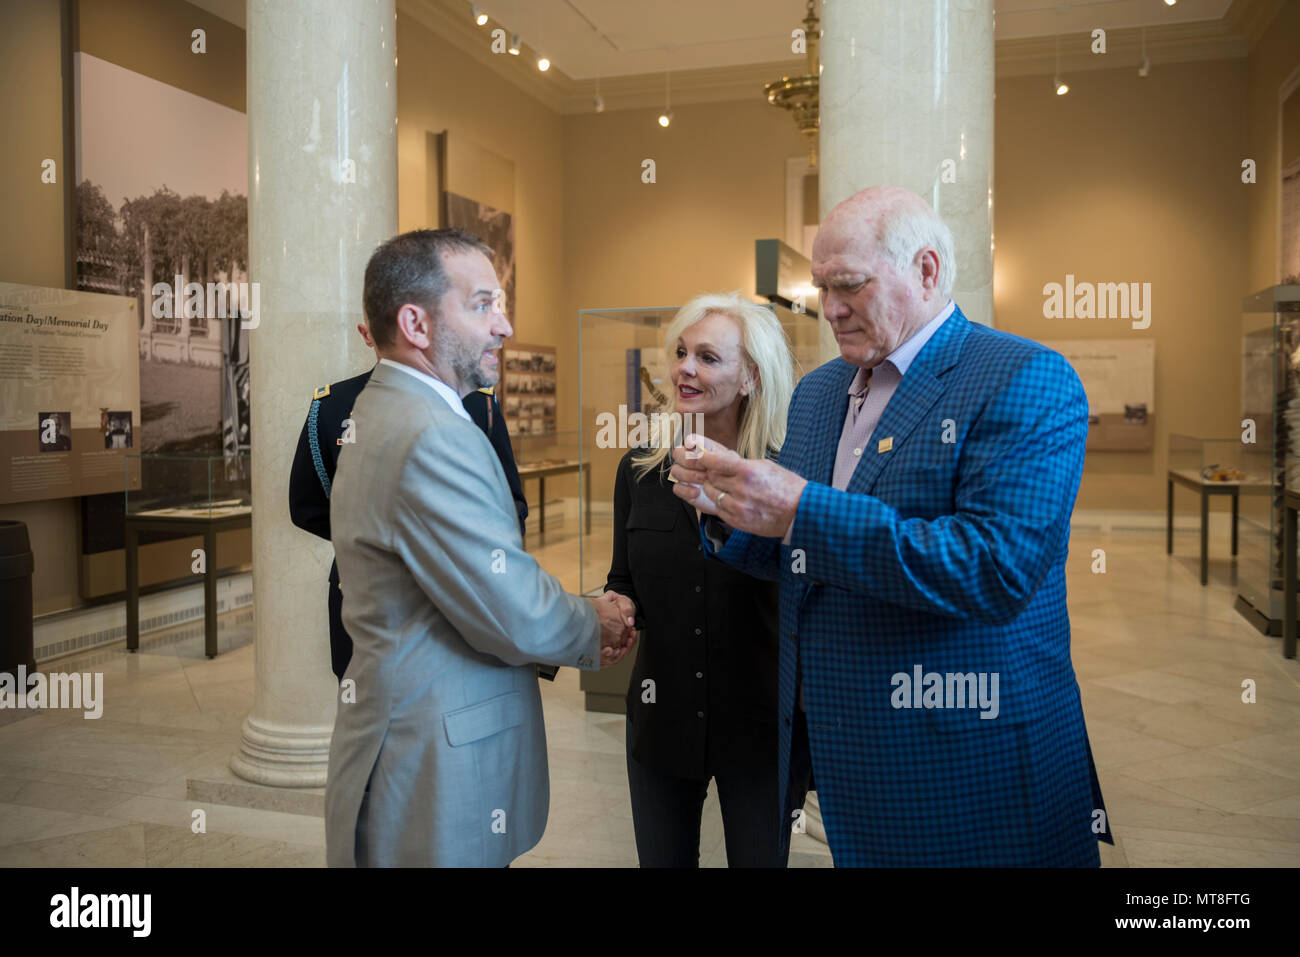 Micheal Migliara (left), director of events and ceremonies, Arlington National Cemetery; presents an Arlington National Cemetery coin to Terry Bradshaw (right), representative of United Service Organization (USO) Metro; and his wife, Tammy Bradshaw (center) in the Memorial Amphitheater Display Room at Arlington National Cemetery, Arlington, Virginia, May 11, 2018. Bradshaw participated in an Army Special Honors Wreath-Laying at the Tomb of the Unknown Soldier during his visit. (U.S. Army photo by Elizabeth Fraser / Arlington National Cemetery/ released) Stock Photo